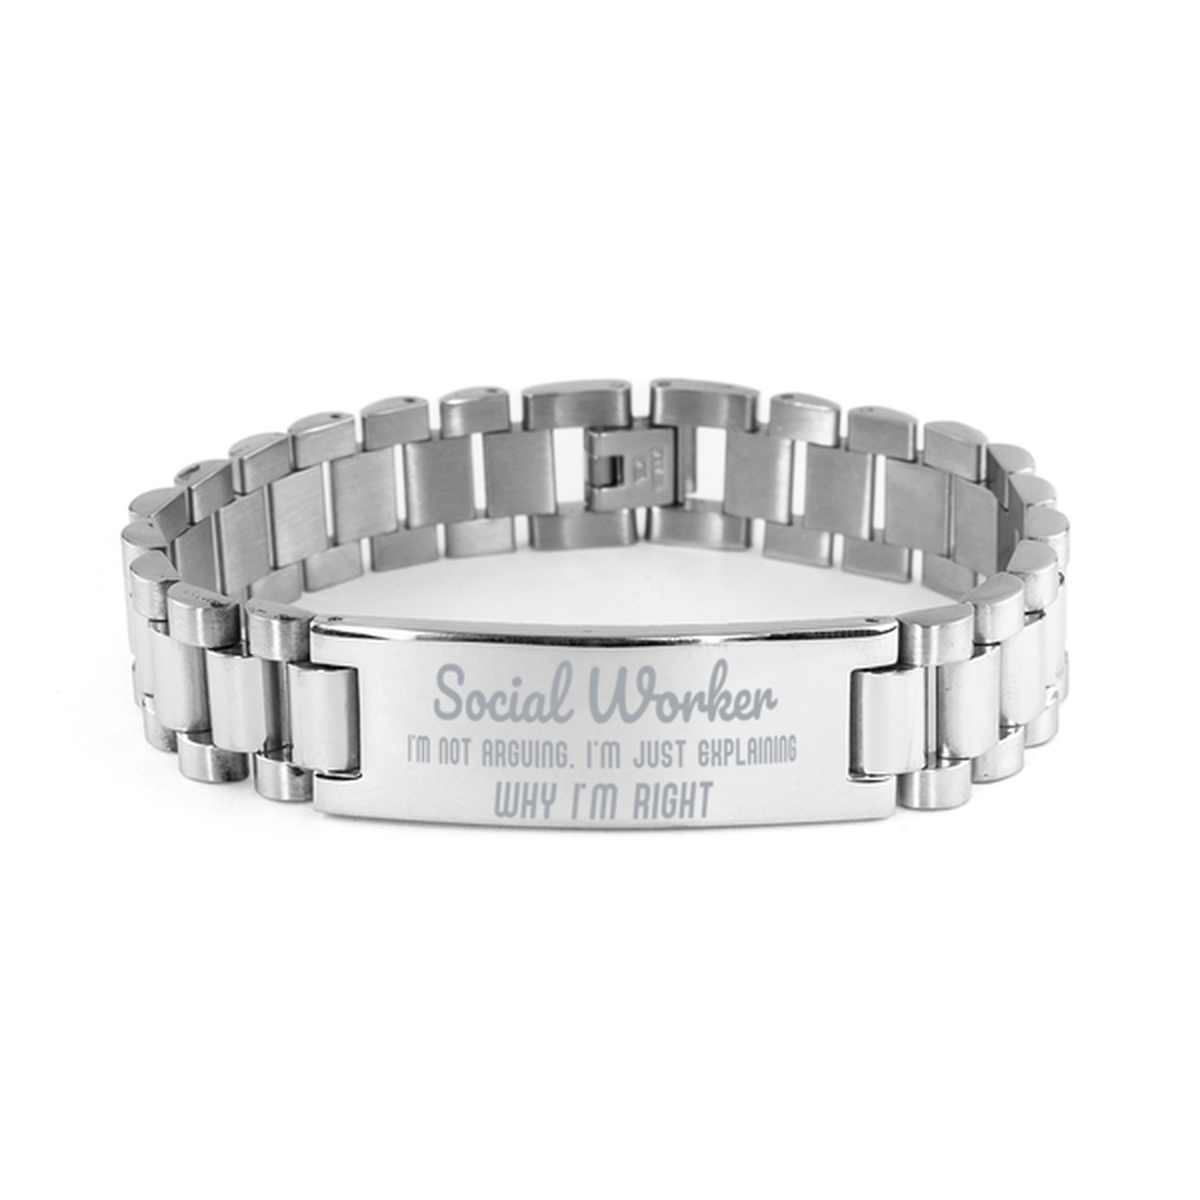 Social Worker I'm not Arguing. I'm Just Explaining Why I'm RIGHT Ladder Stainless Steel Bracelet, Graduation Birthday Christmas Social Worker Gifts For Social Worker Funny Saying Quote Present for Men Women Coworker